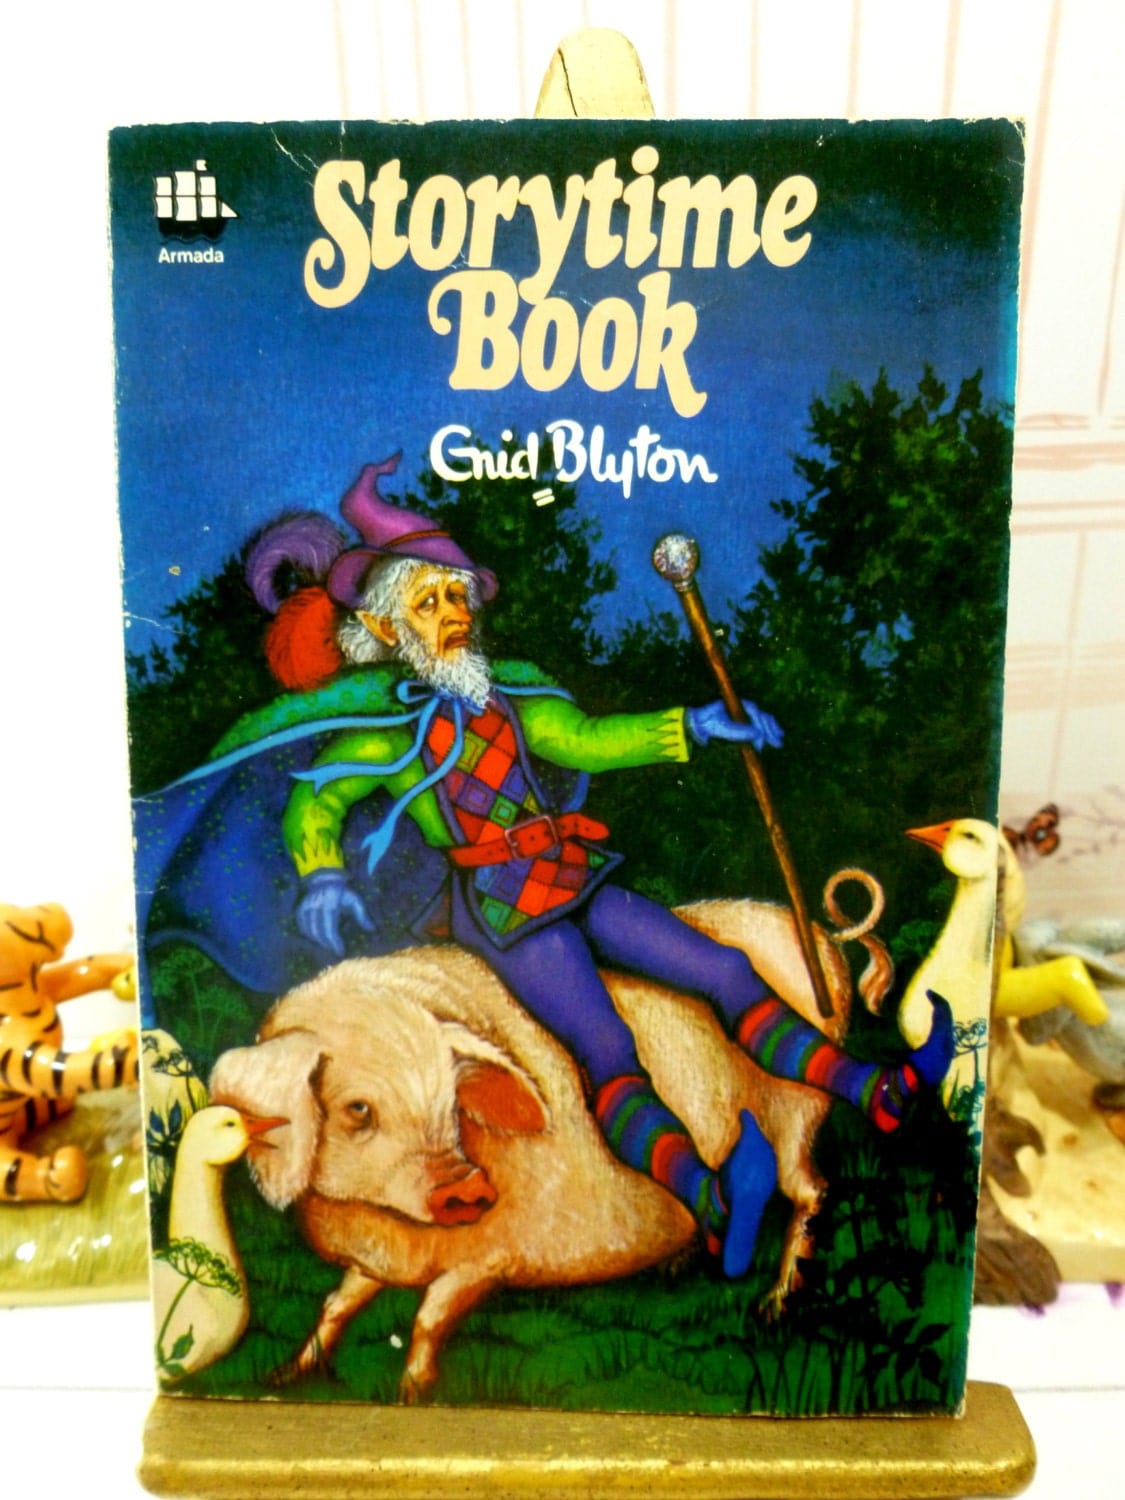 Paperback cover of Enid Blyton Storytime Book Vintage Paperback Armada 1970s showing a fairytale gnome riding a pig. 